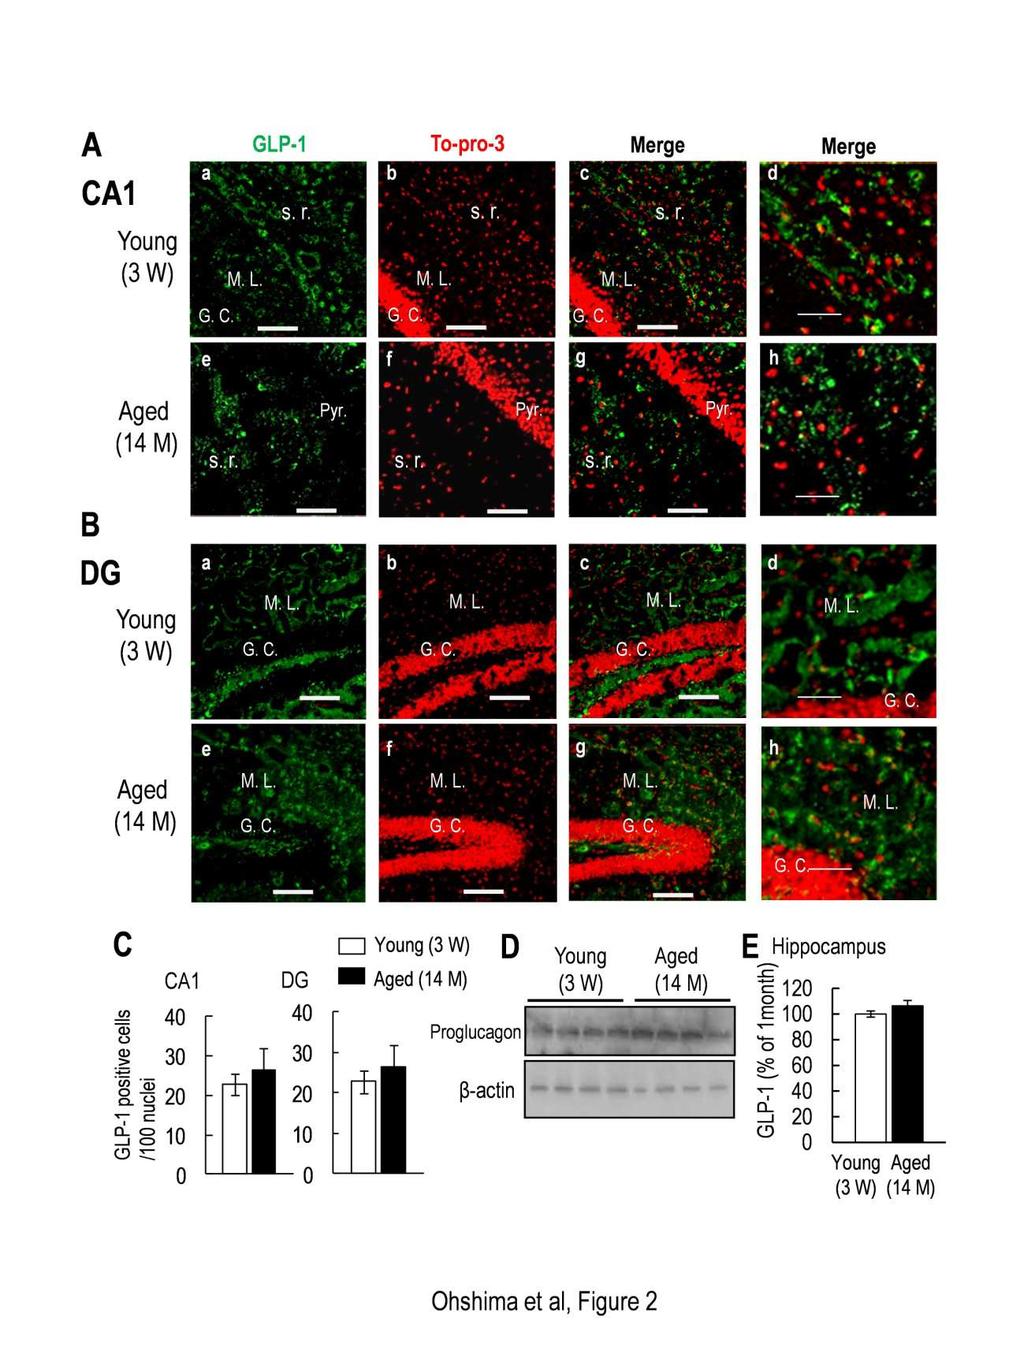 American Journal of BioScience 2015; 3(1): 11-27 15 In contrast, GLP-1 immunoreactivity in the CA1 region of the hippocampus was preserved in aged mice compared with young mice (Fig.